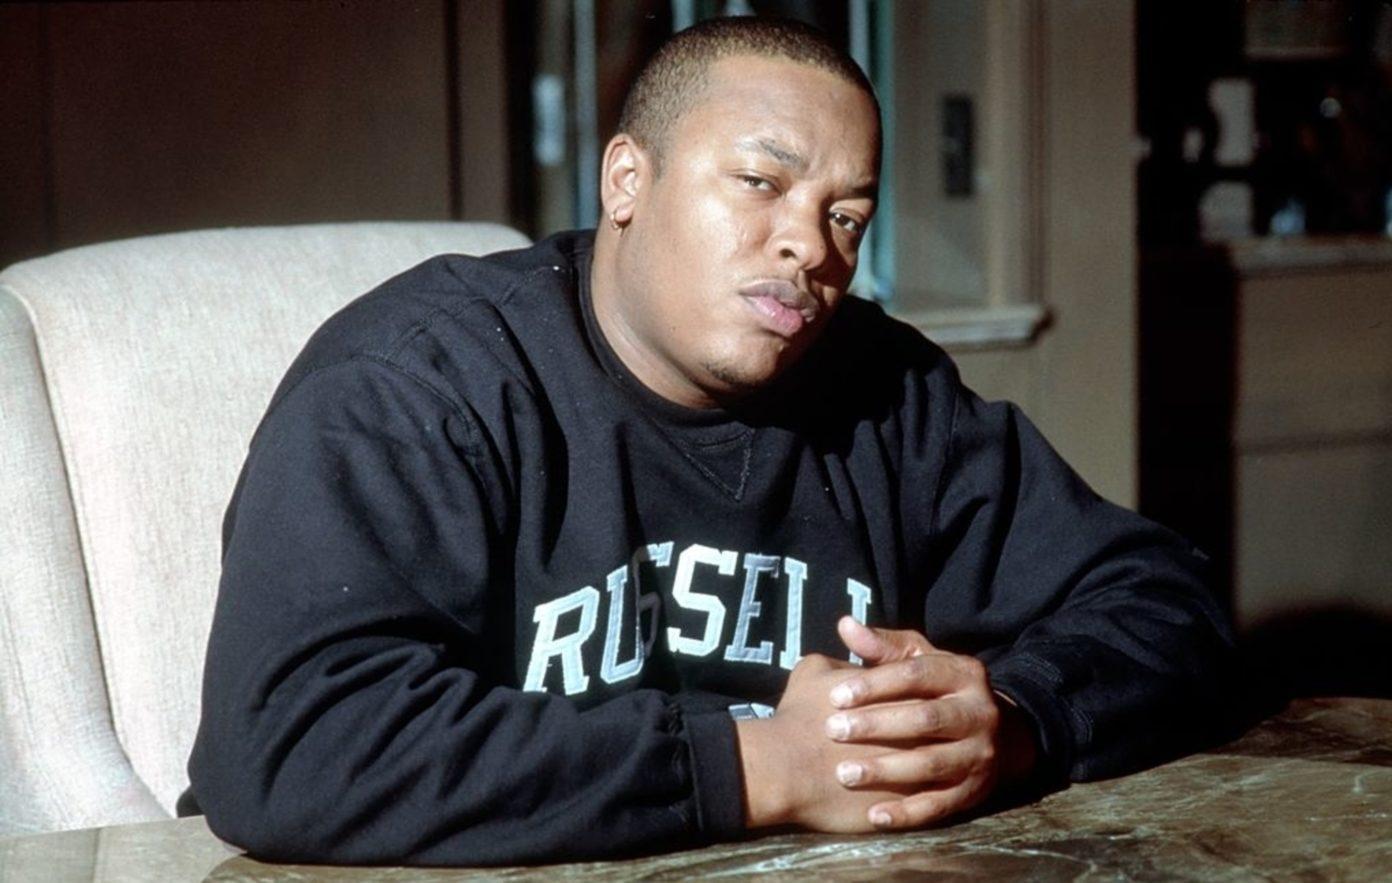 dr-dre-the-chronic-30-years